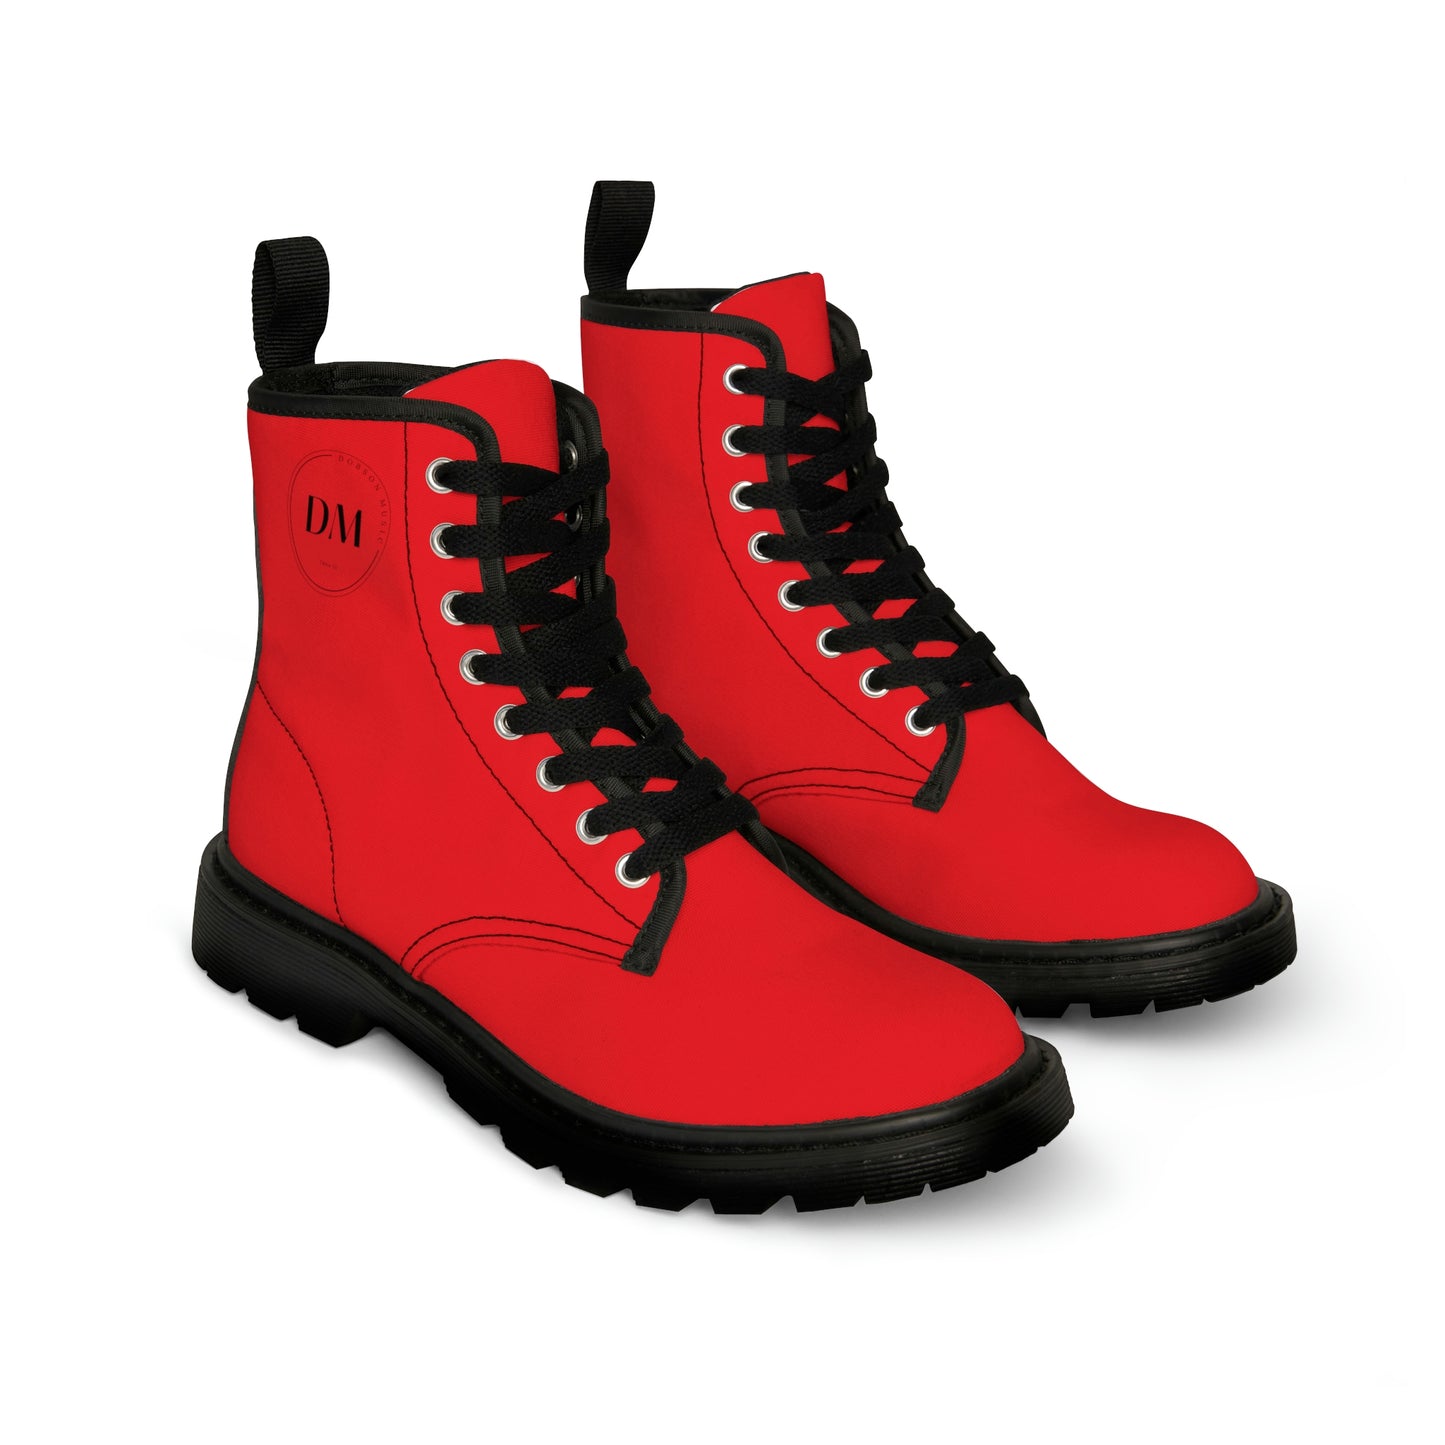 DM Women's Canvas Boots - Red